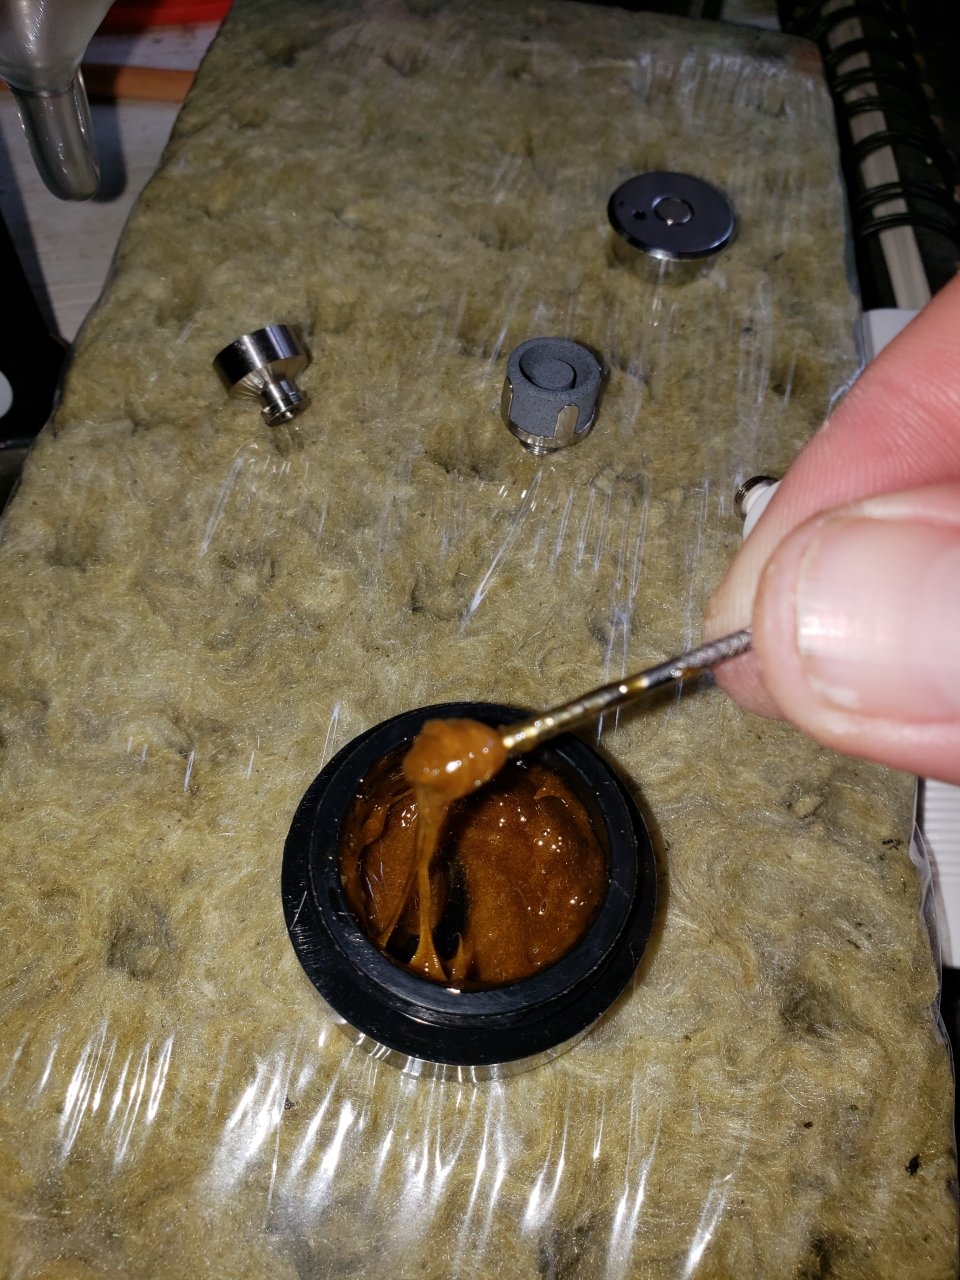 Extractohol concentrate